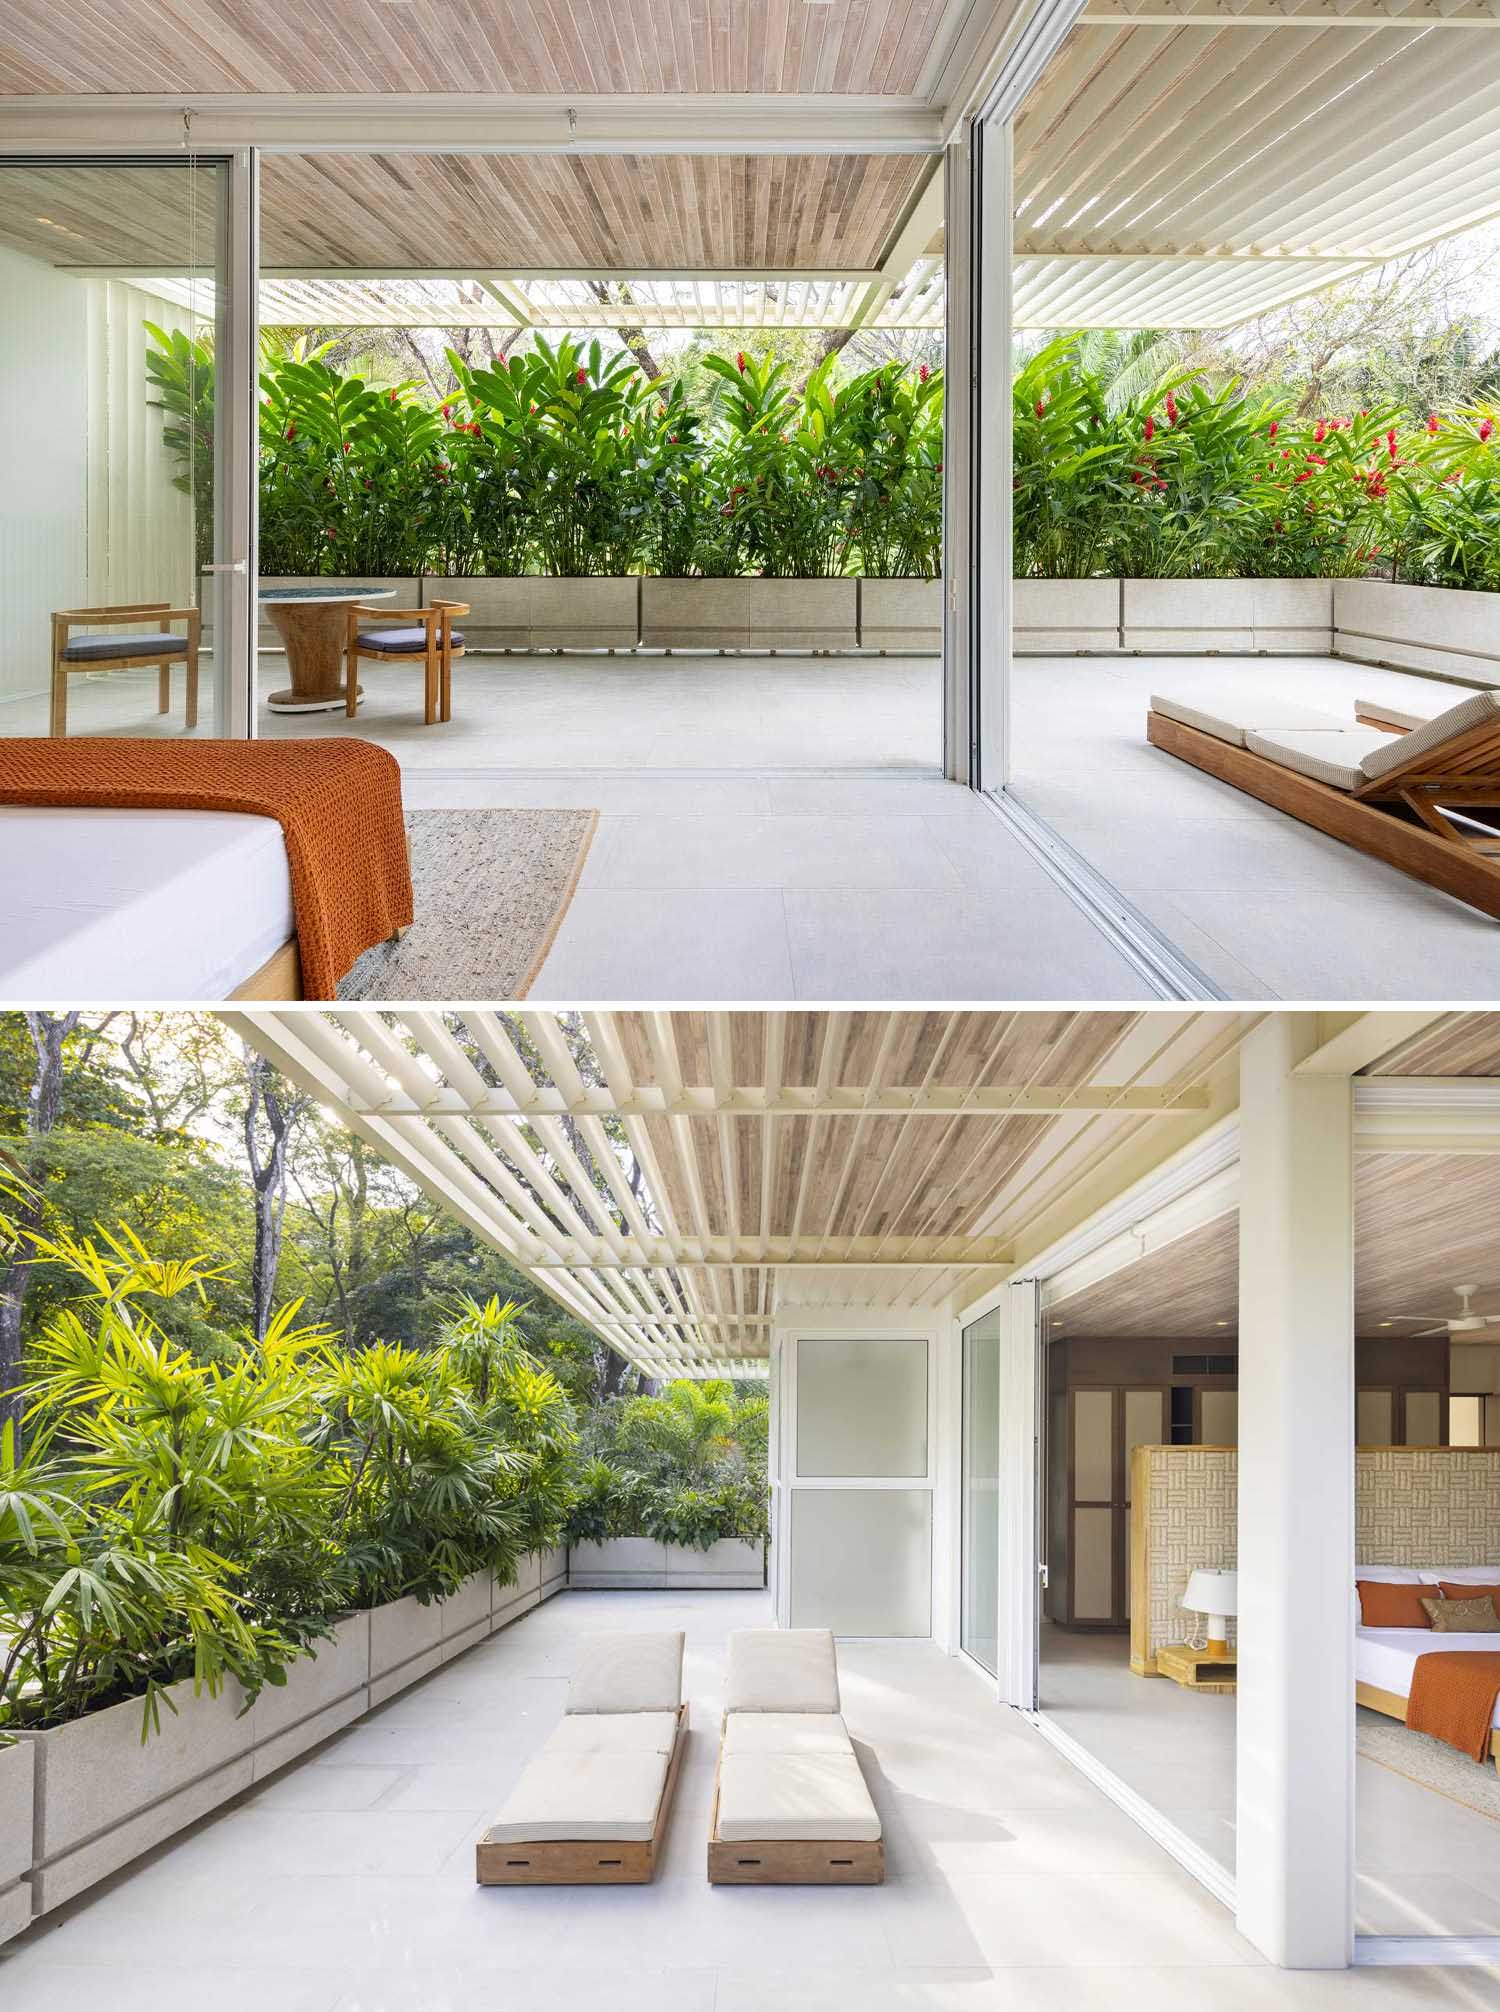 A modern bedroom that opens to an outdoor space with planter boxes filled with tropical plants.